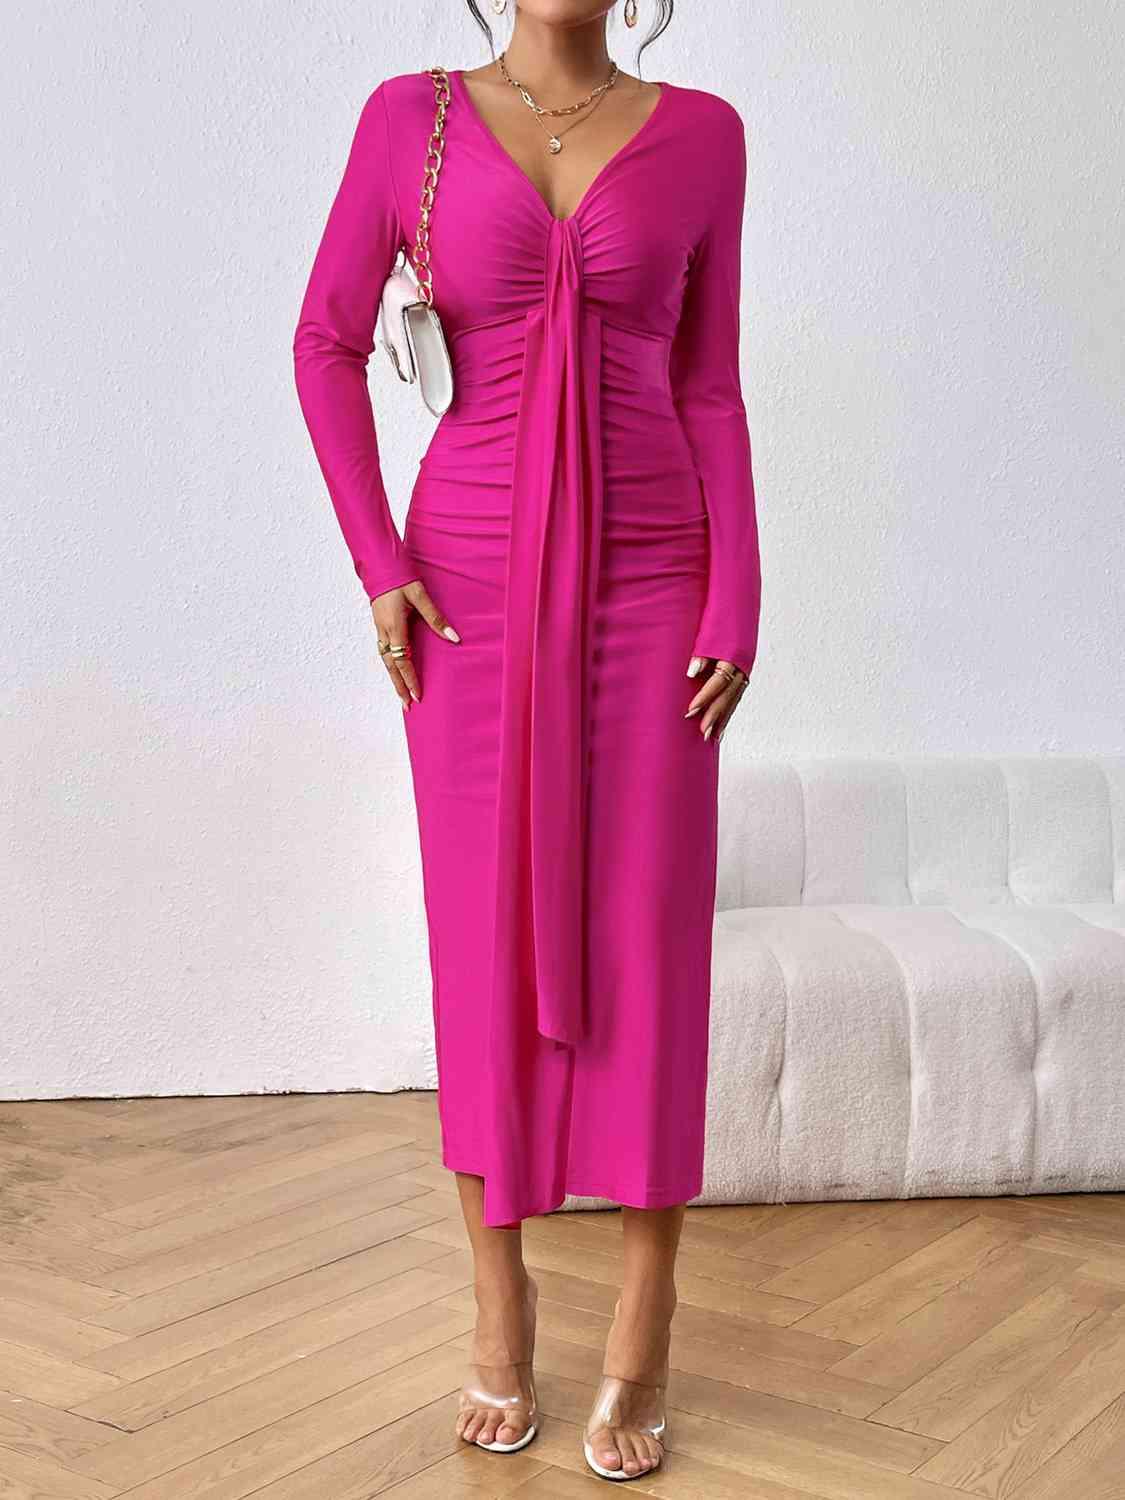 a woman in a pink dress standing on a wooden floor